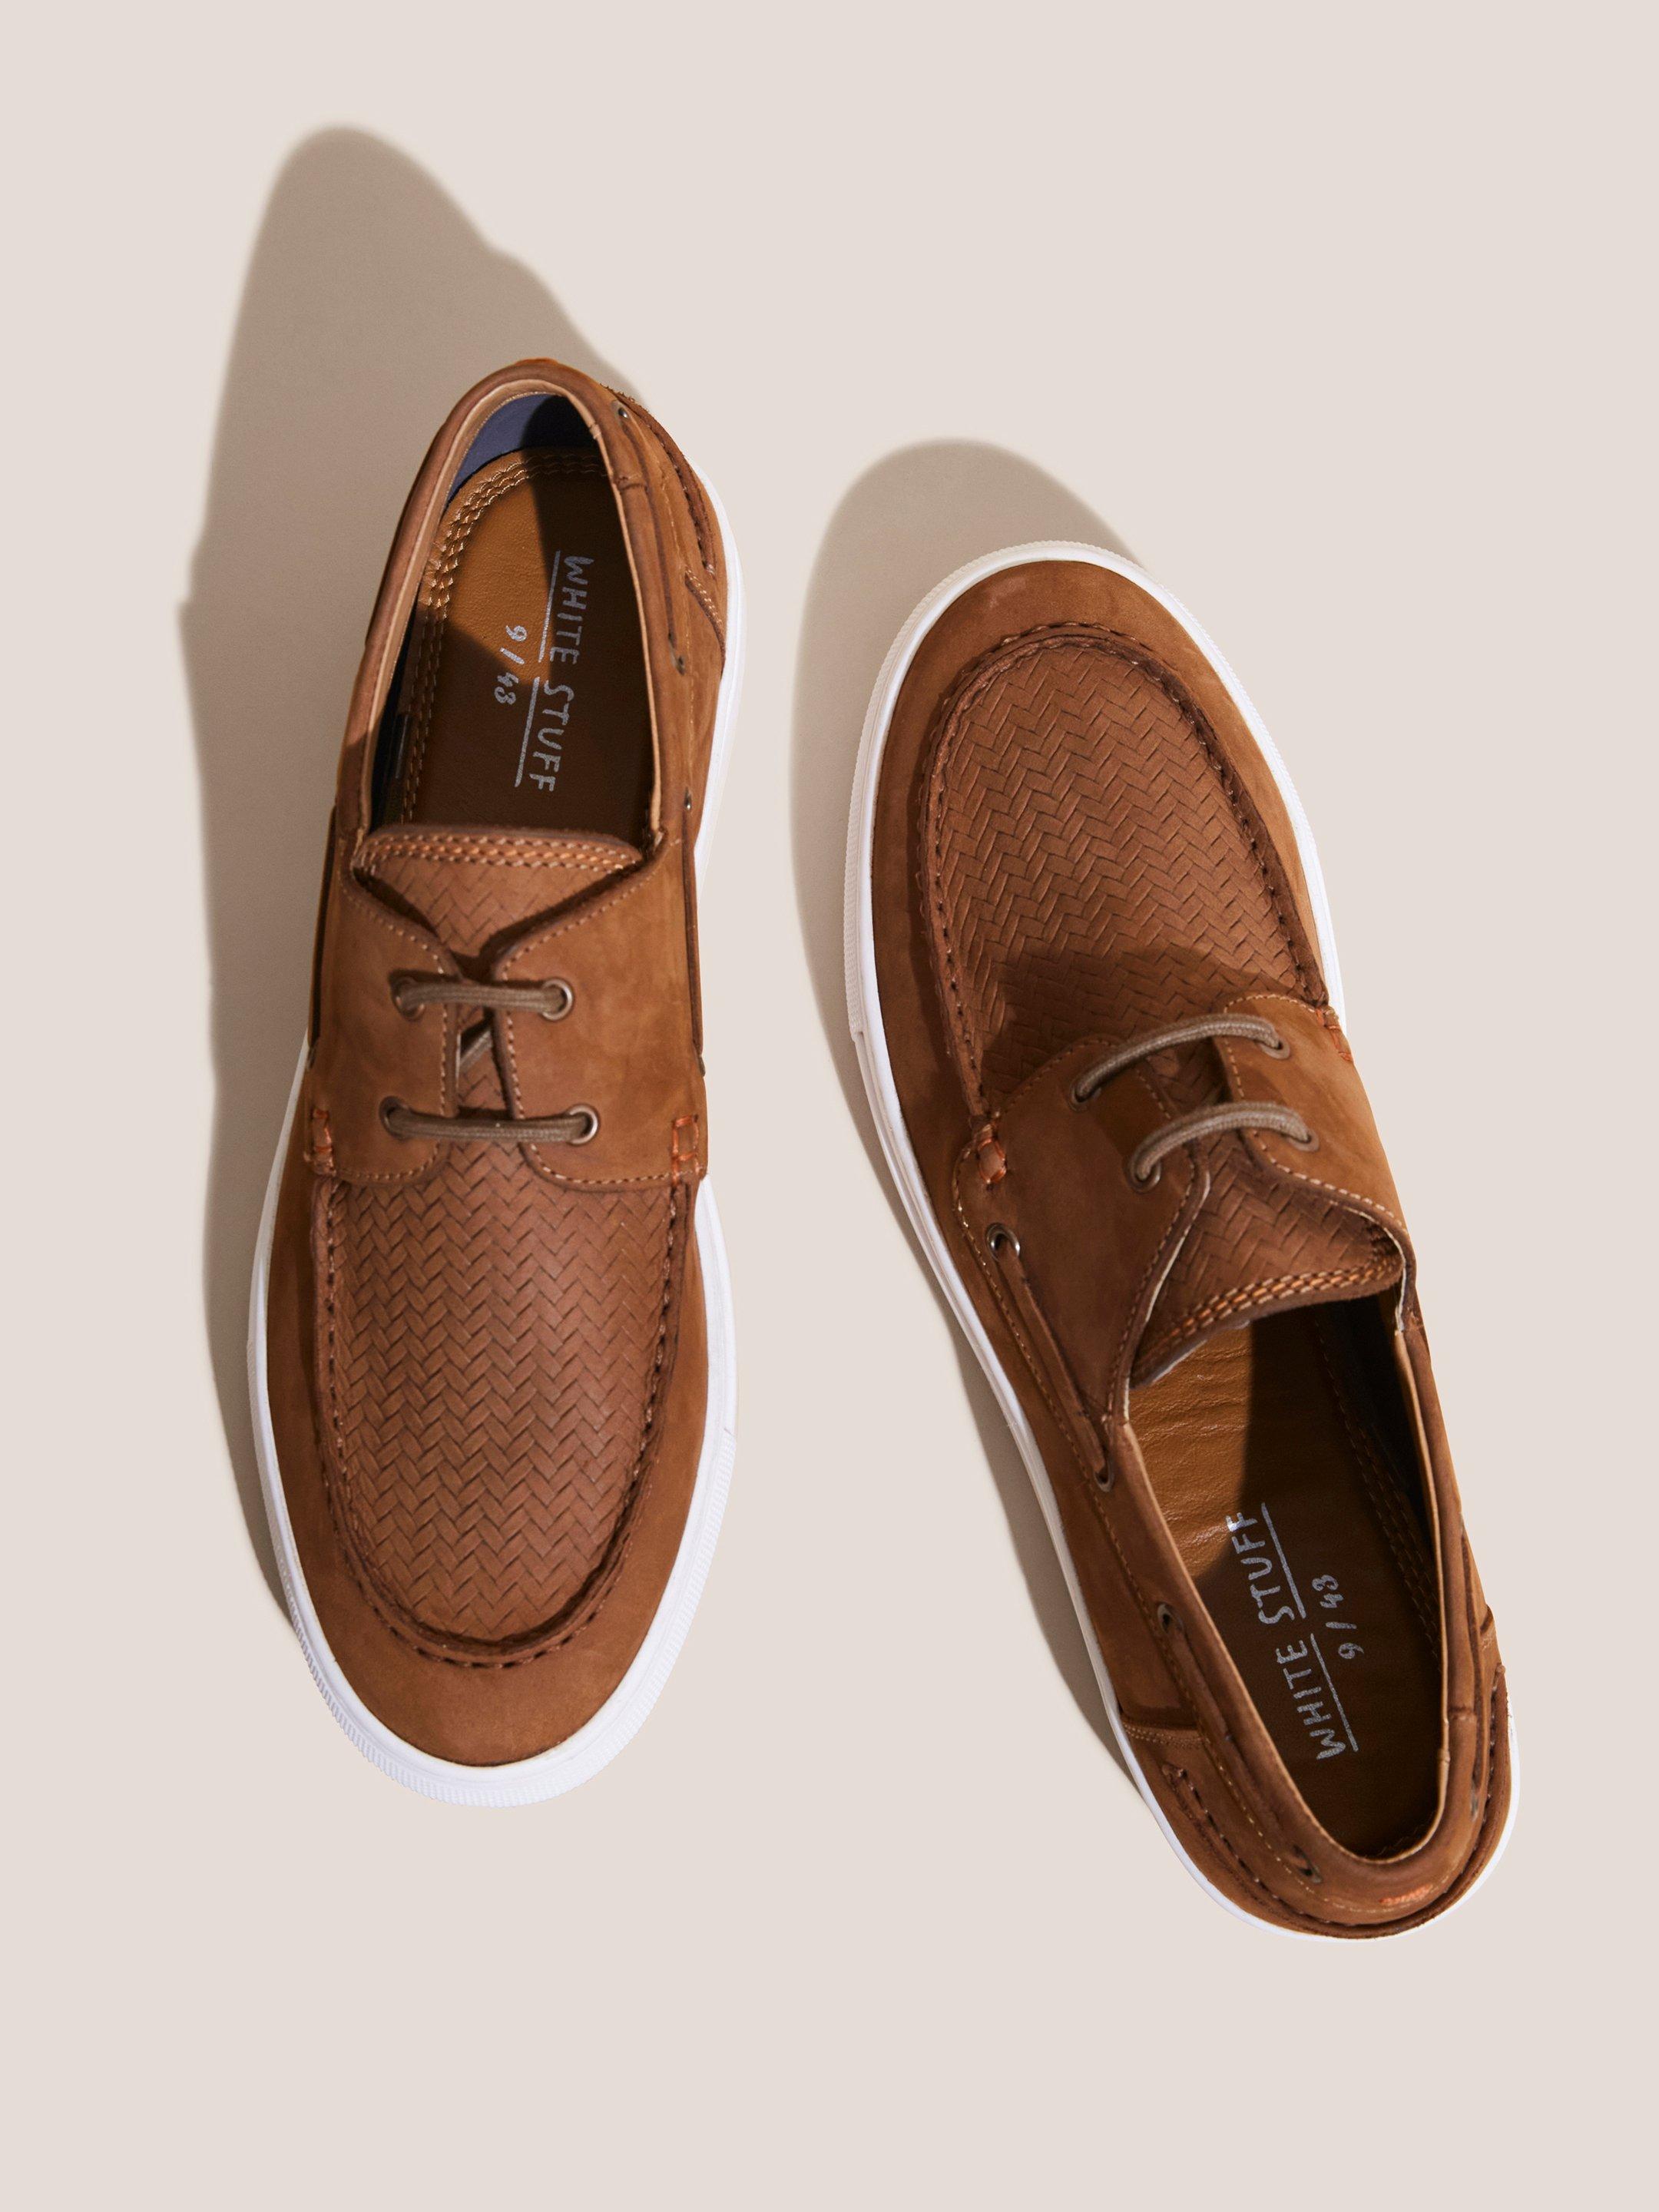 Leather Woven Boat Shoe in MID TAN - FLAT BACK